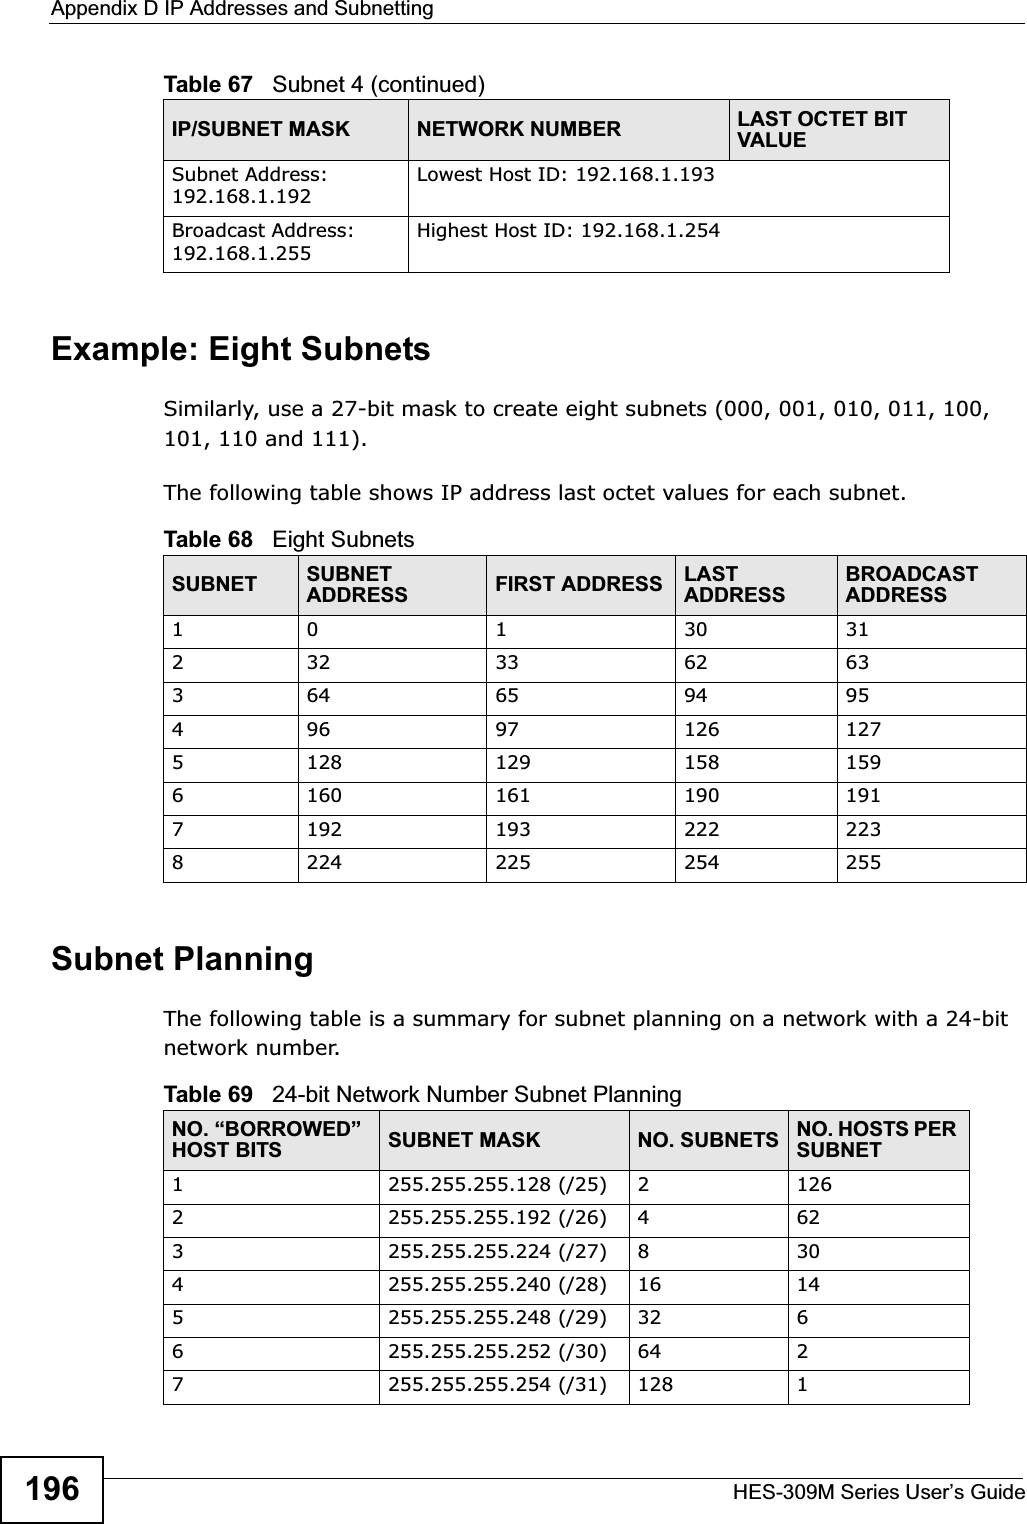 Appendix D IP Addresses and SubnettingHES-309M Series User’s Guide196Example: Eight SubnetsSimilarly, use a 27-bit mask to create eight subnets (000, 001, 010, 011, 100, 101, 110 and 111). The following table shows IP address last octet values for each subnet.Subnet PlanningThe following table is a summary for subnet planning on a network with a 24-bit network number.Subnet Address: 192.168.1.192Lowest Host ID: 192.168.1.193Broadcast Address: 192.168.1.255Highest Host ID: 192.168.1.254Table 67   Subnet 4 (continued)IP/SUBNET MASK NETWORK NUMBER LAST OCTET BIT VALUETable 68   Eight SubnetsSUBNET SUBNET ADDRESS FIRST ADDRESS LAST ADDRESSBROADCAST ADDRESS1 0 1 30 31232 33 62 63364 65 94 95496 97 126 1275128 129 158 1596160 161 190 1917192 193 222 2238224 225 254 255Table 69   24-bit Network Number Subnet PlanningNO. “BORROWED” HOST BITS SUBNET MASK NO. SUBNETS NO. HOSTS PER SUBNET1255.255.255.128 (/25) 21262255.255.255.192 (/26) 4623255.255.255.224 (/27) 8304255.255.255.240 (/28) 16 145255.255.255.248 (/29) 32 66255.255.255.252 (/30) 64 27255.255.255.254 (/31) 128 1